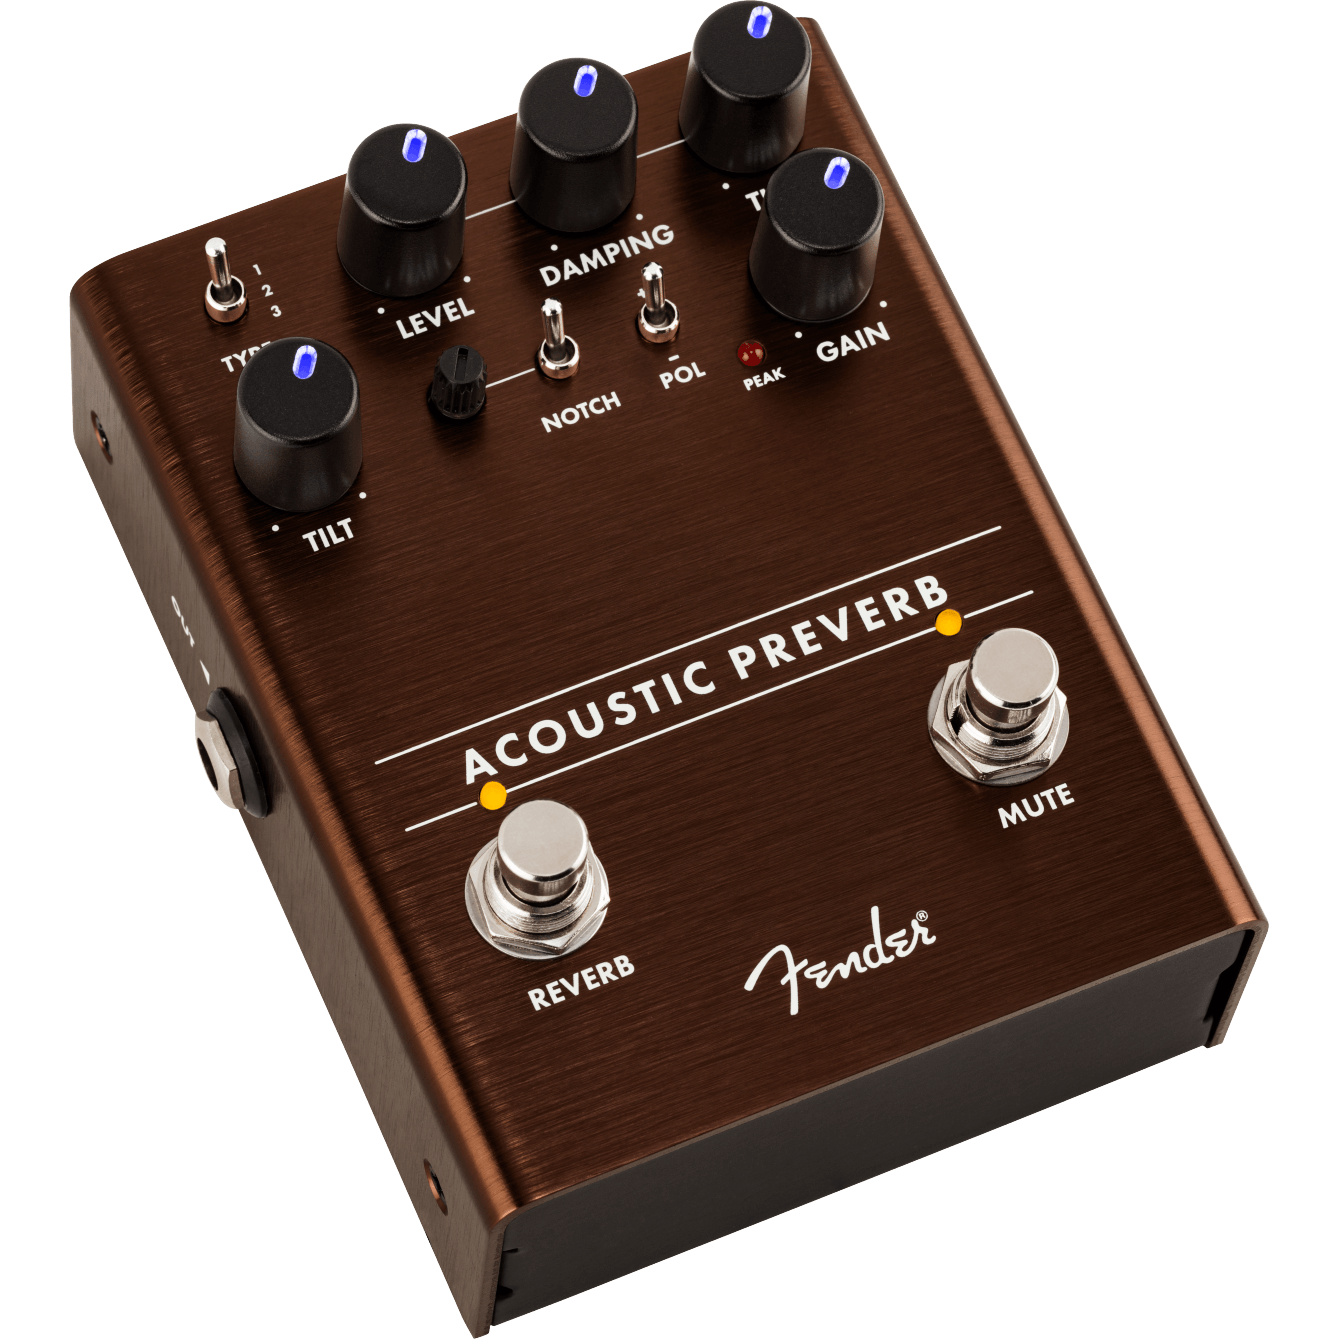 Acoustic Pre/Verb - Guitar - Effects Pedals by Fender at Muso's Stuff